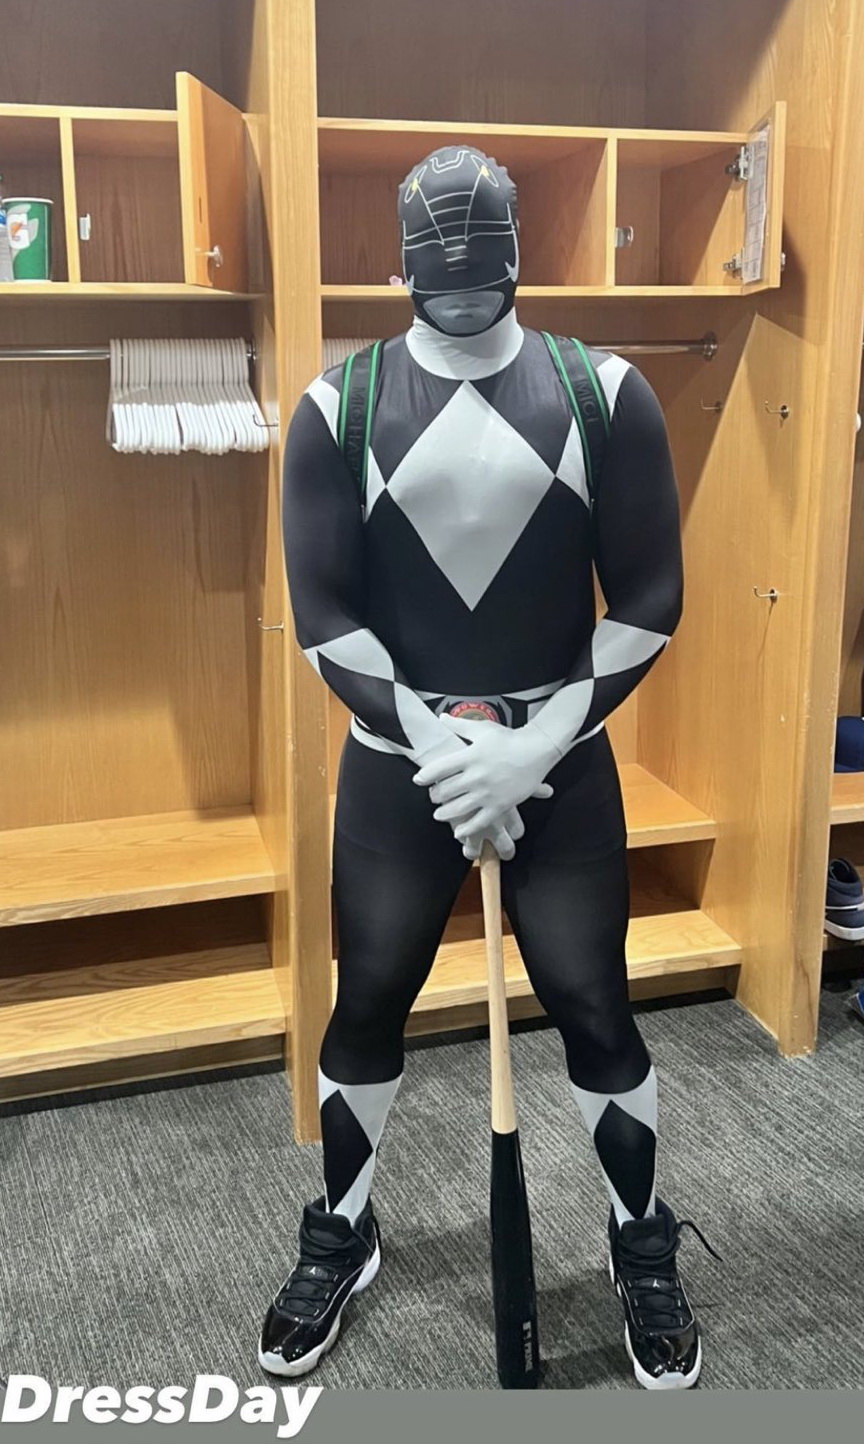 Dodgers held their 2023 team dress-up day, which is always one of the  season's best days – Dodgers Digest